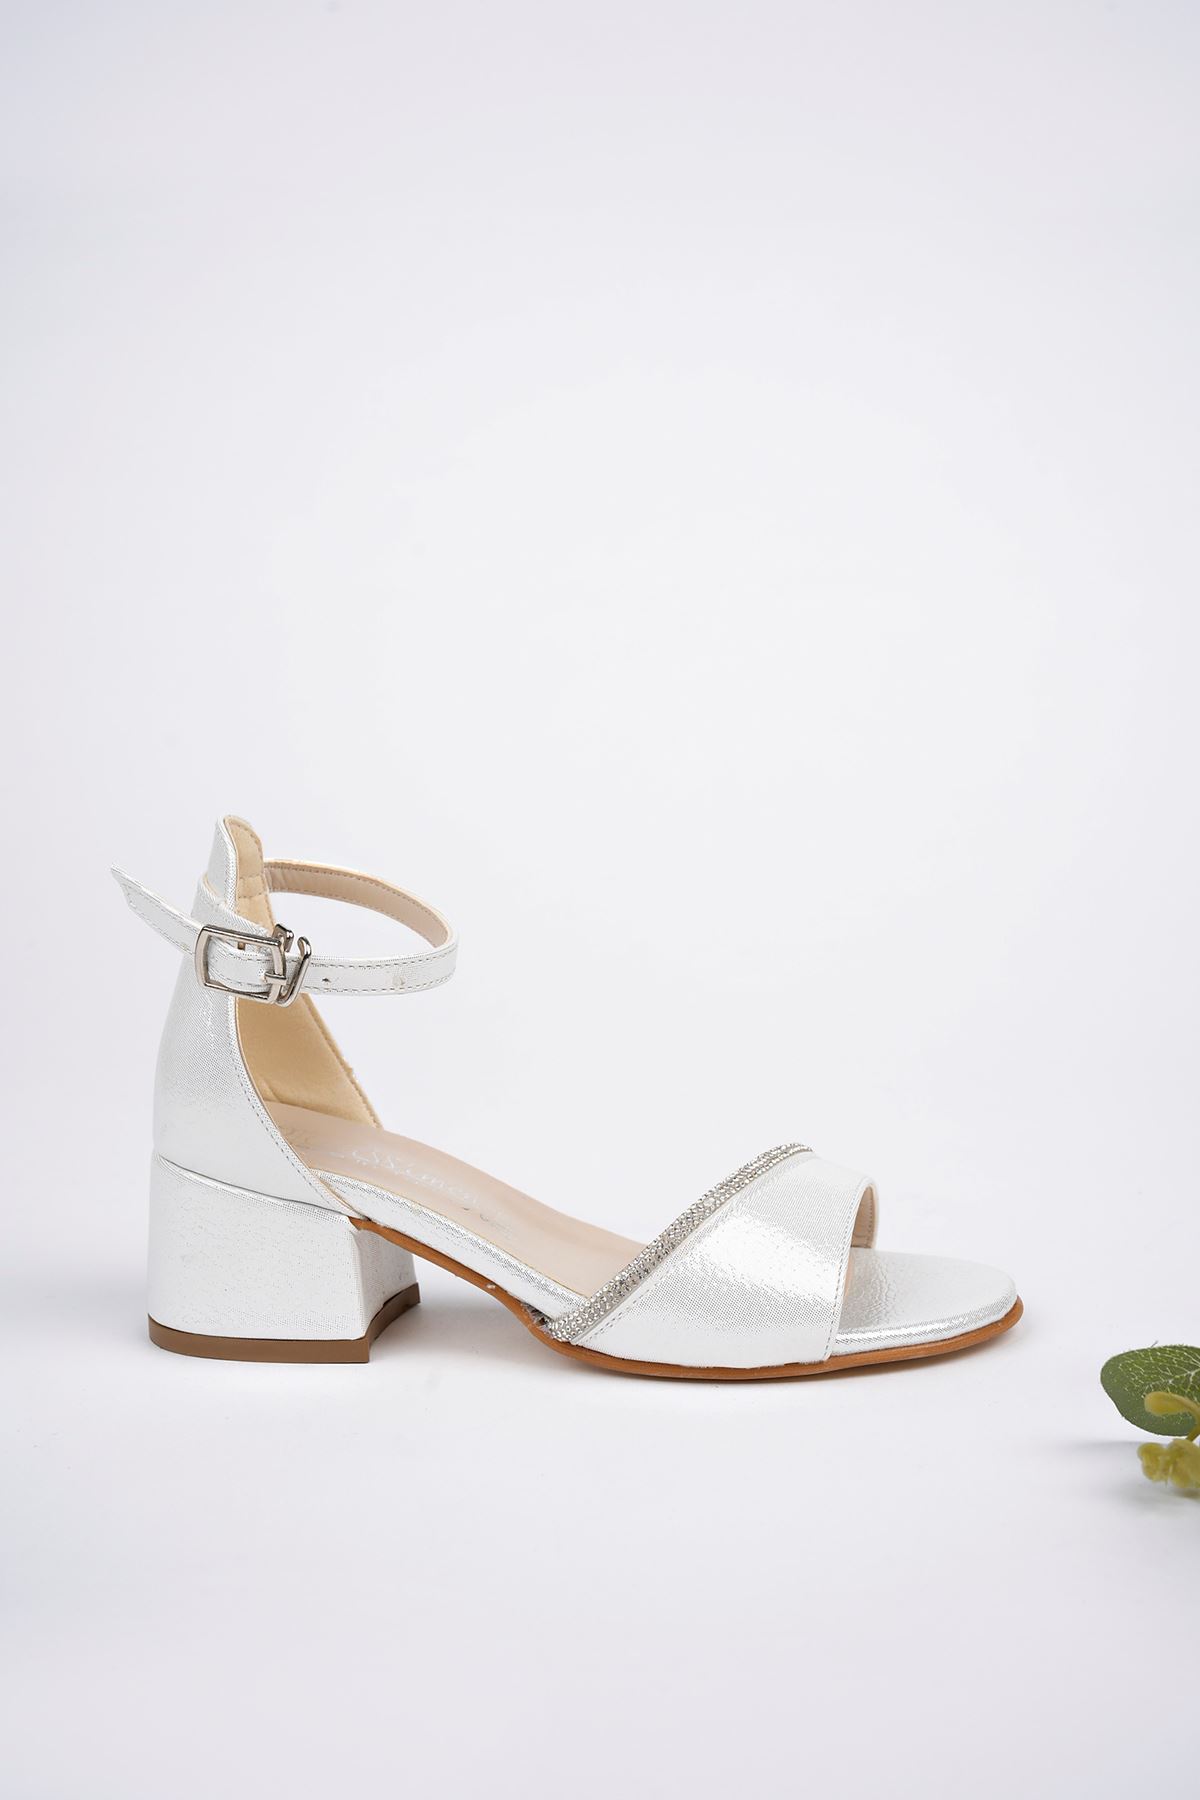 Heeled Mother of Pearl Stone Sandals for Girls